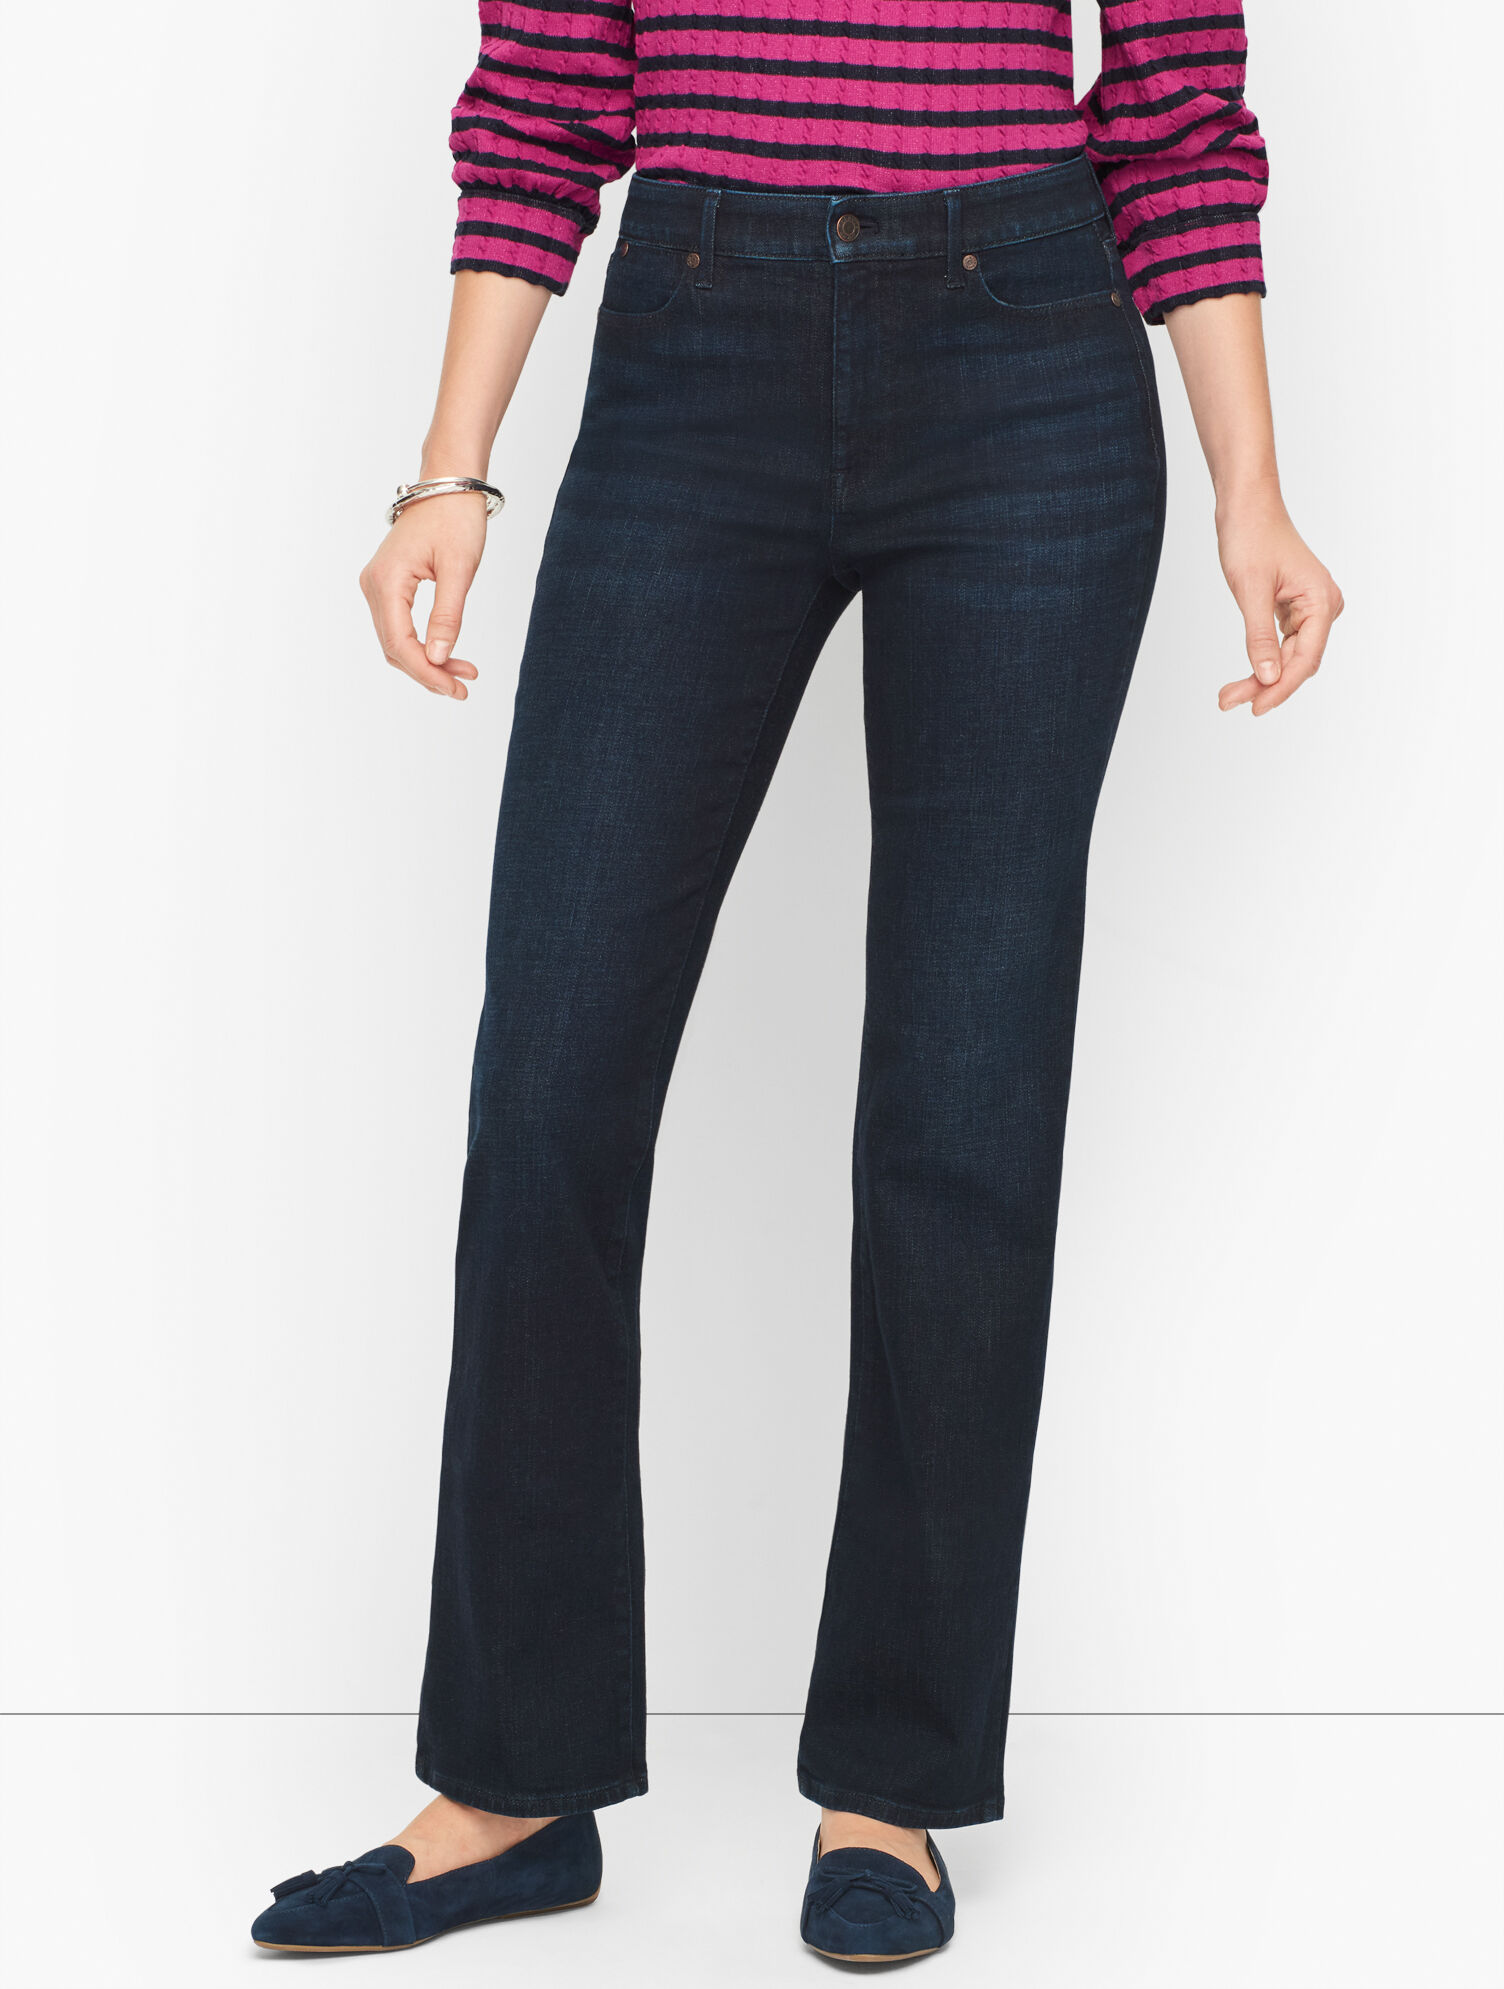 Barely Boot Jeans - Starlight Wash - Curvy Fit